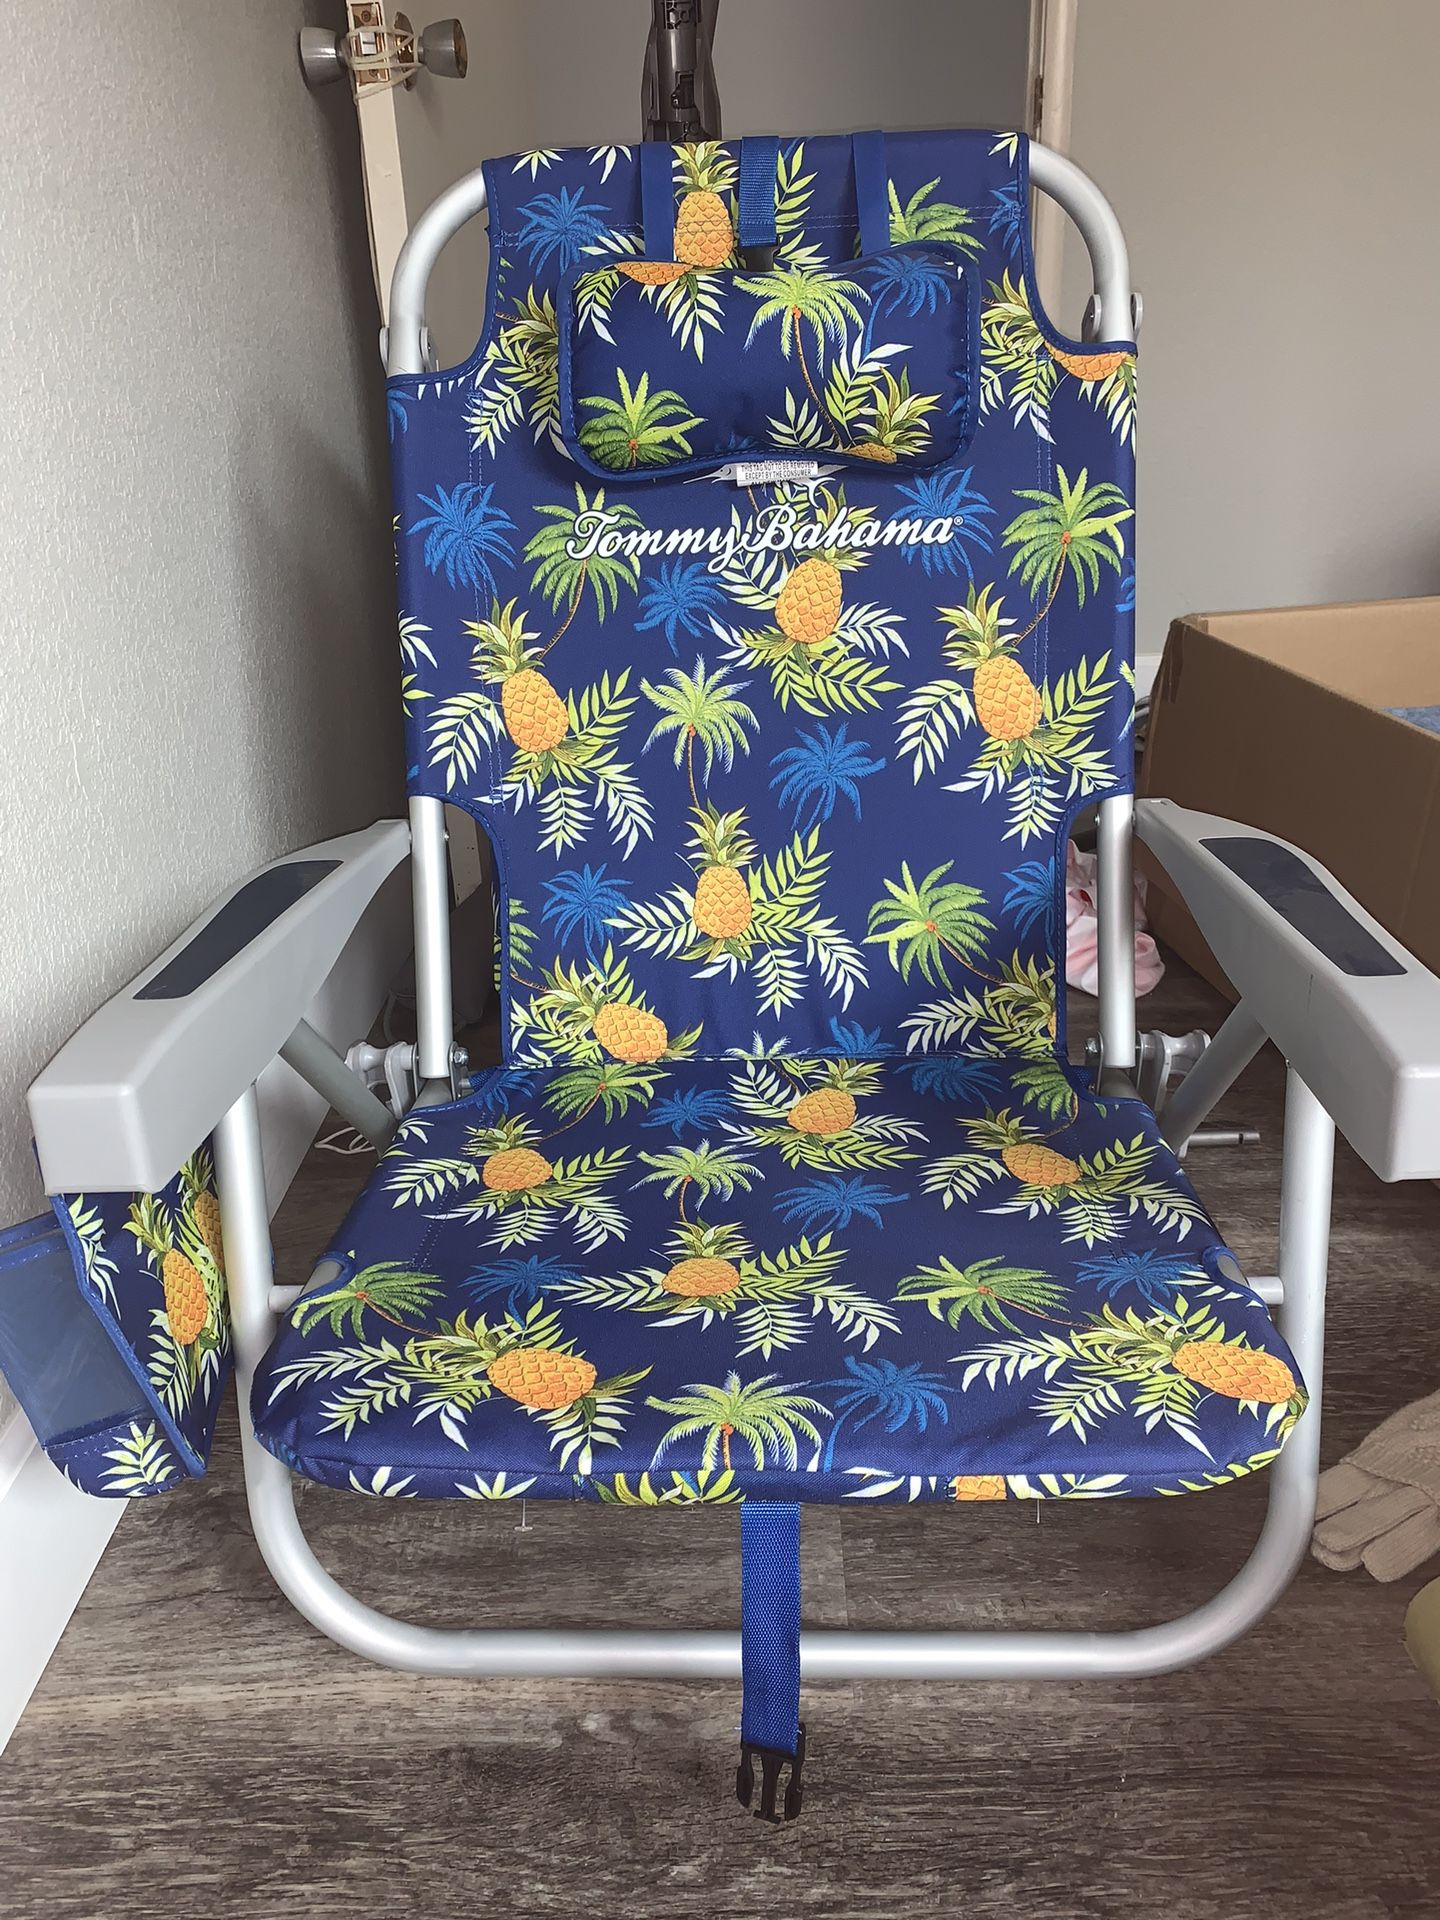 ommy Bahama Backpack Cooler Beach Chairs - Blue Pineapple